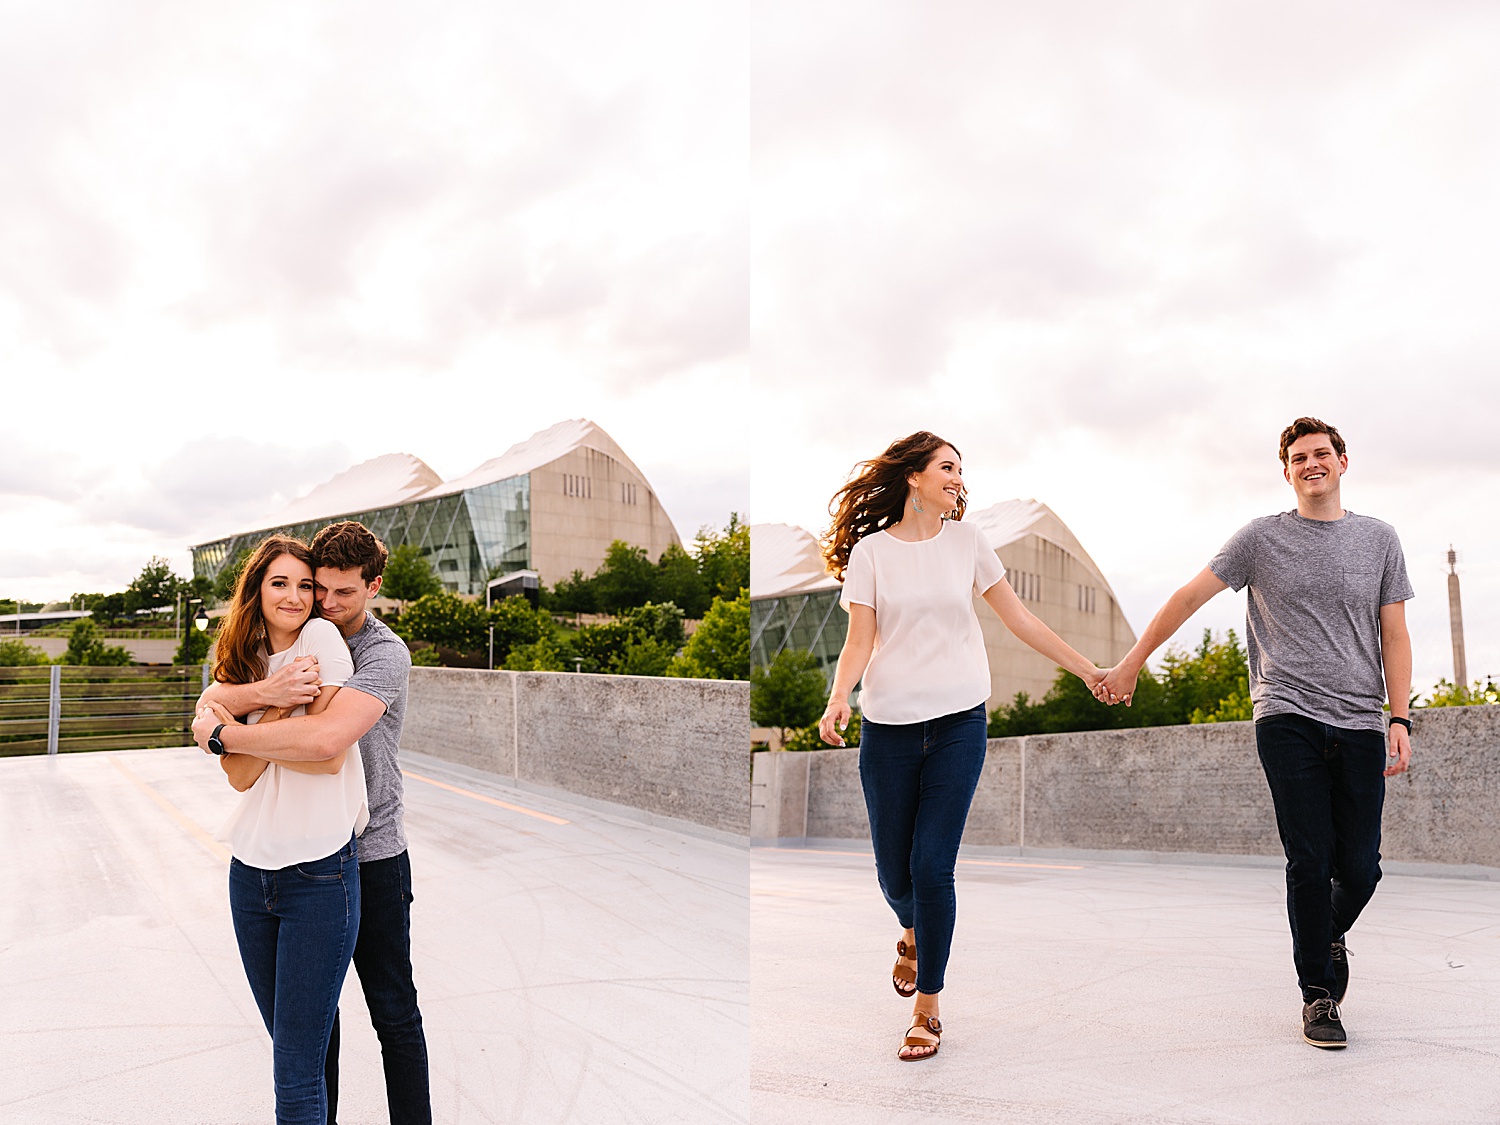 running on the sideways while holding hands wearing jeans with fiance by Natalie Nichole Photos